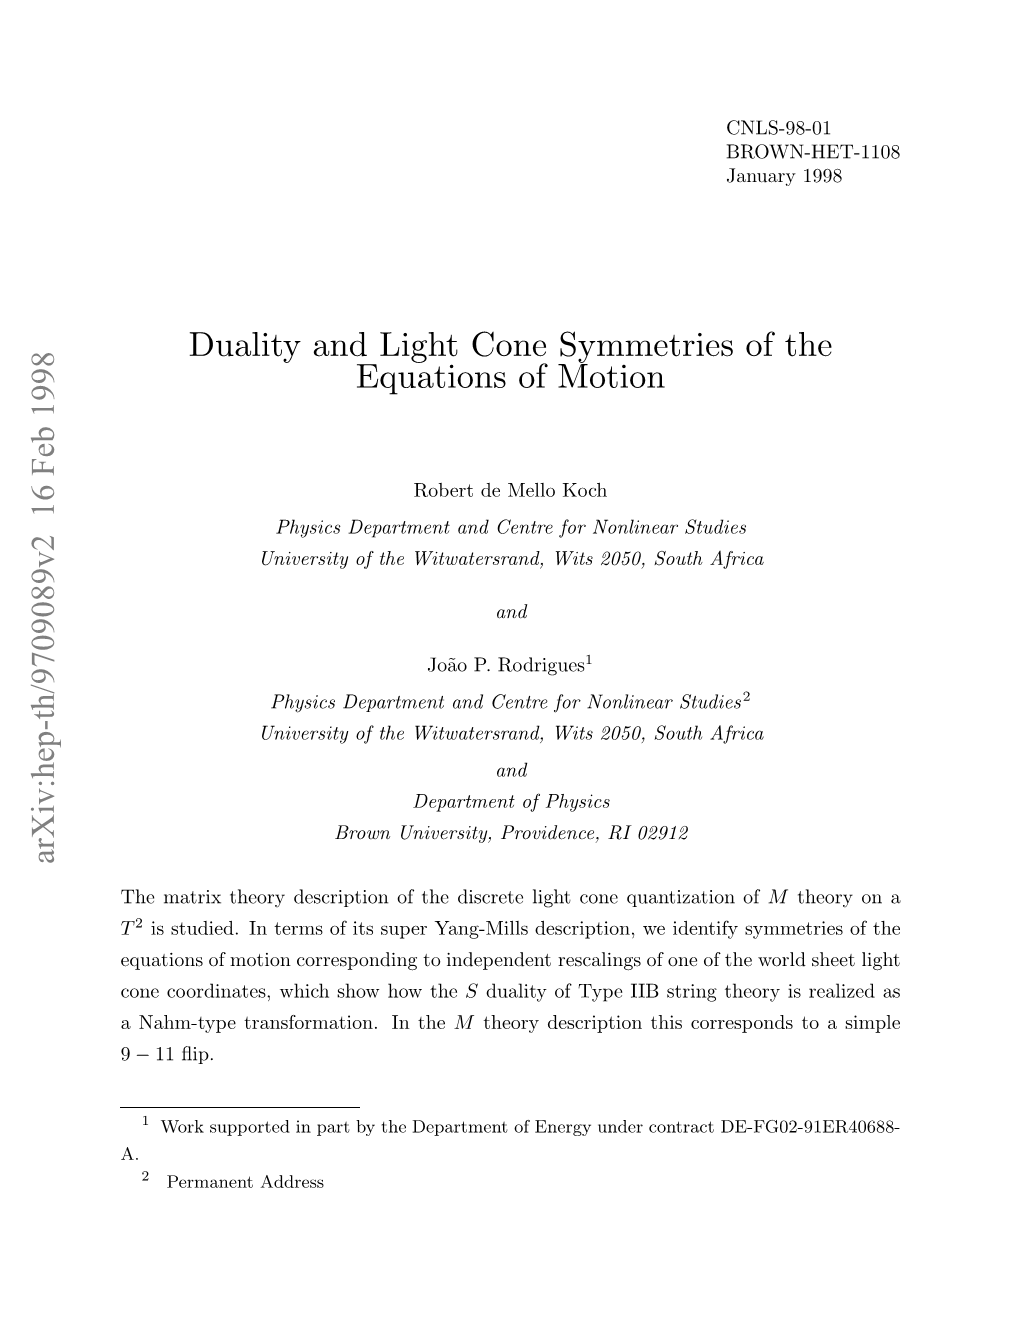 Duality and Light Cone Symmetries of the Equations of Motion